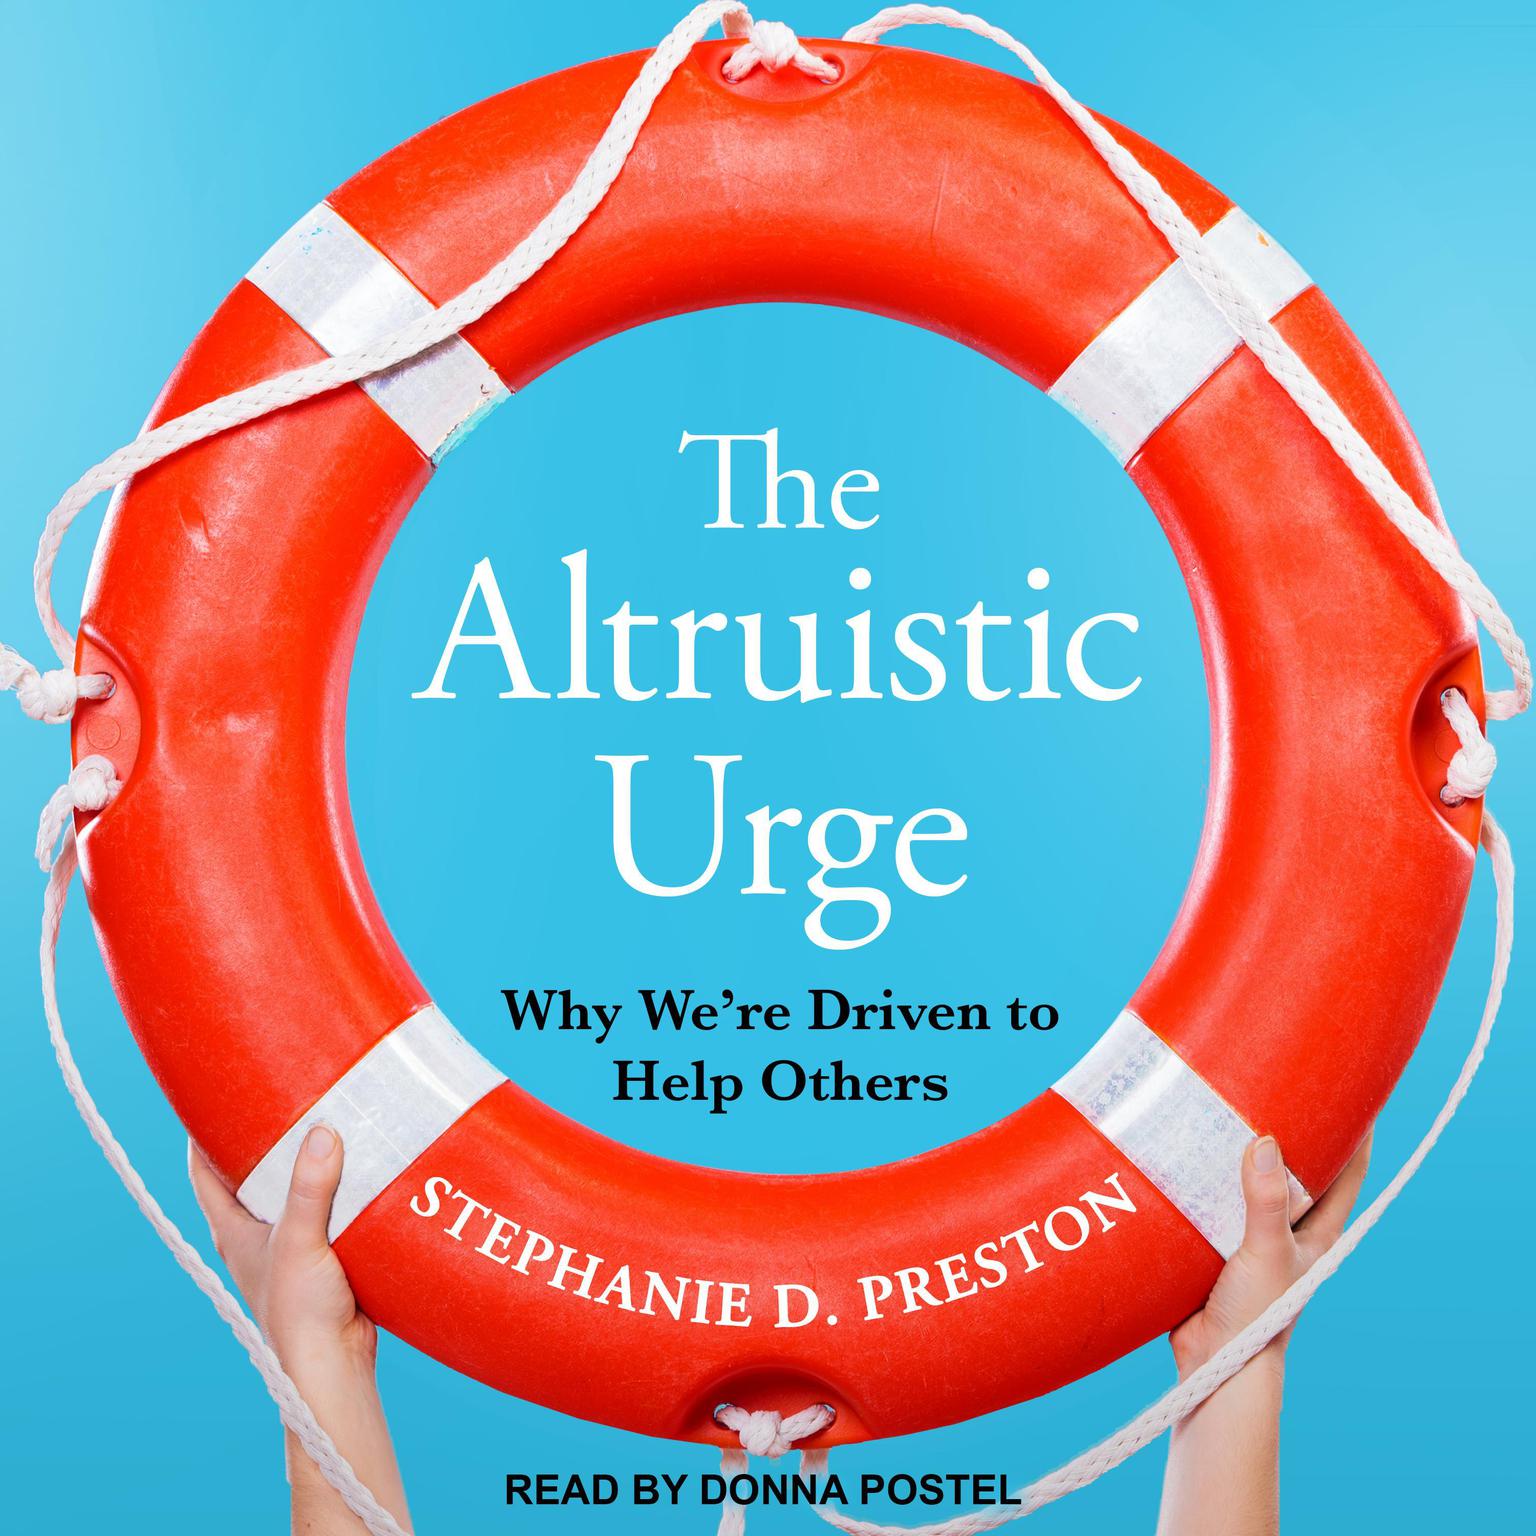 The Altruistic Urge: Why We’re Driven to Help Others Audiobook, by Stephanie D. Preston